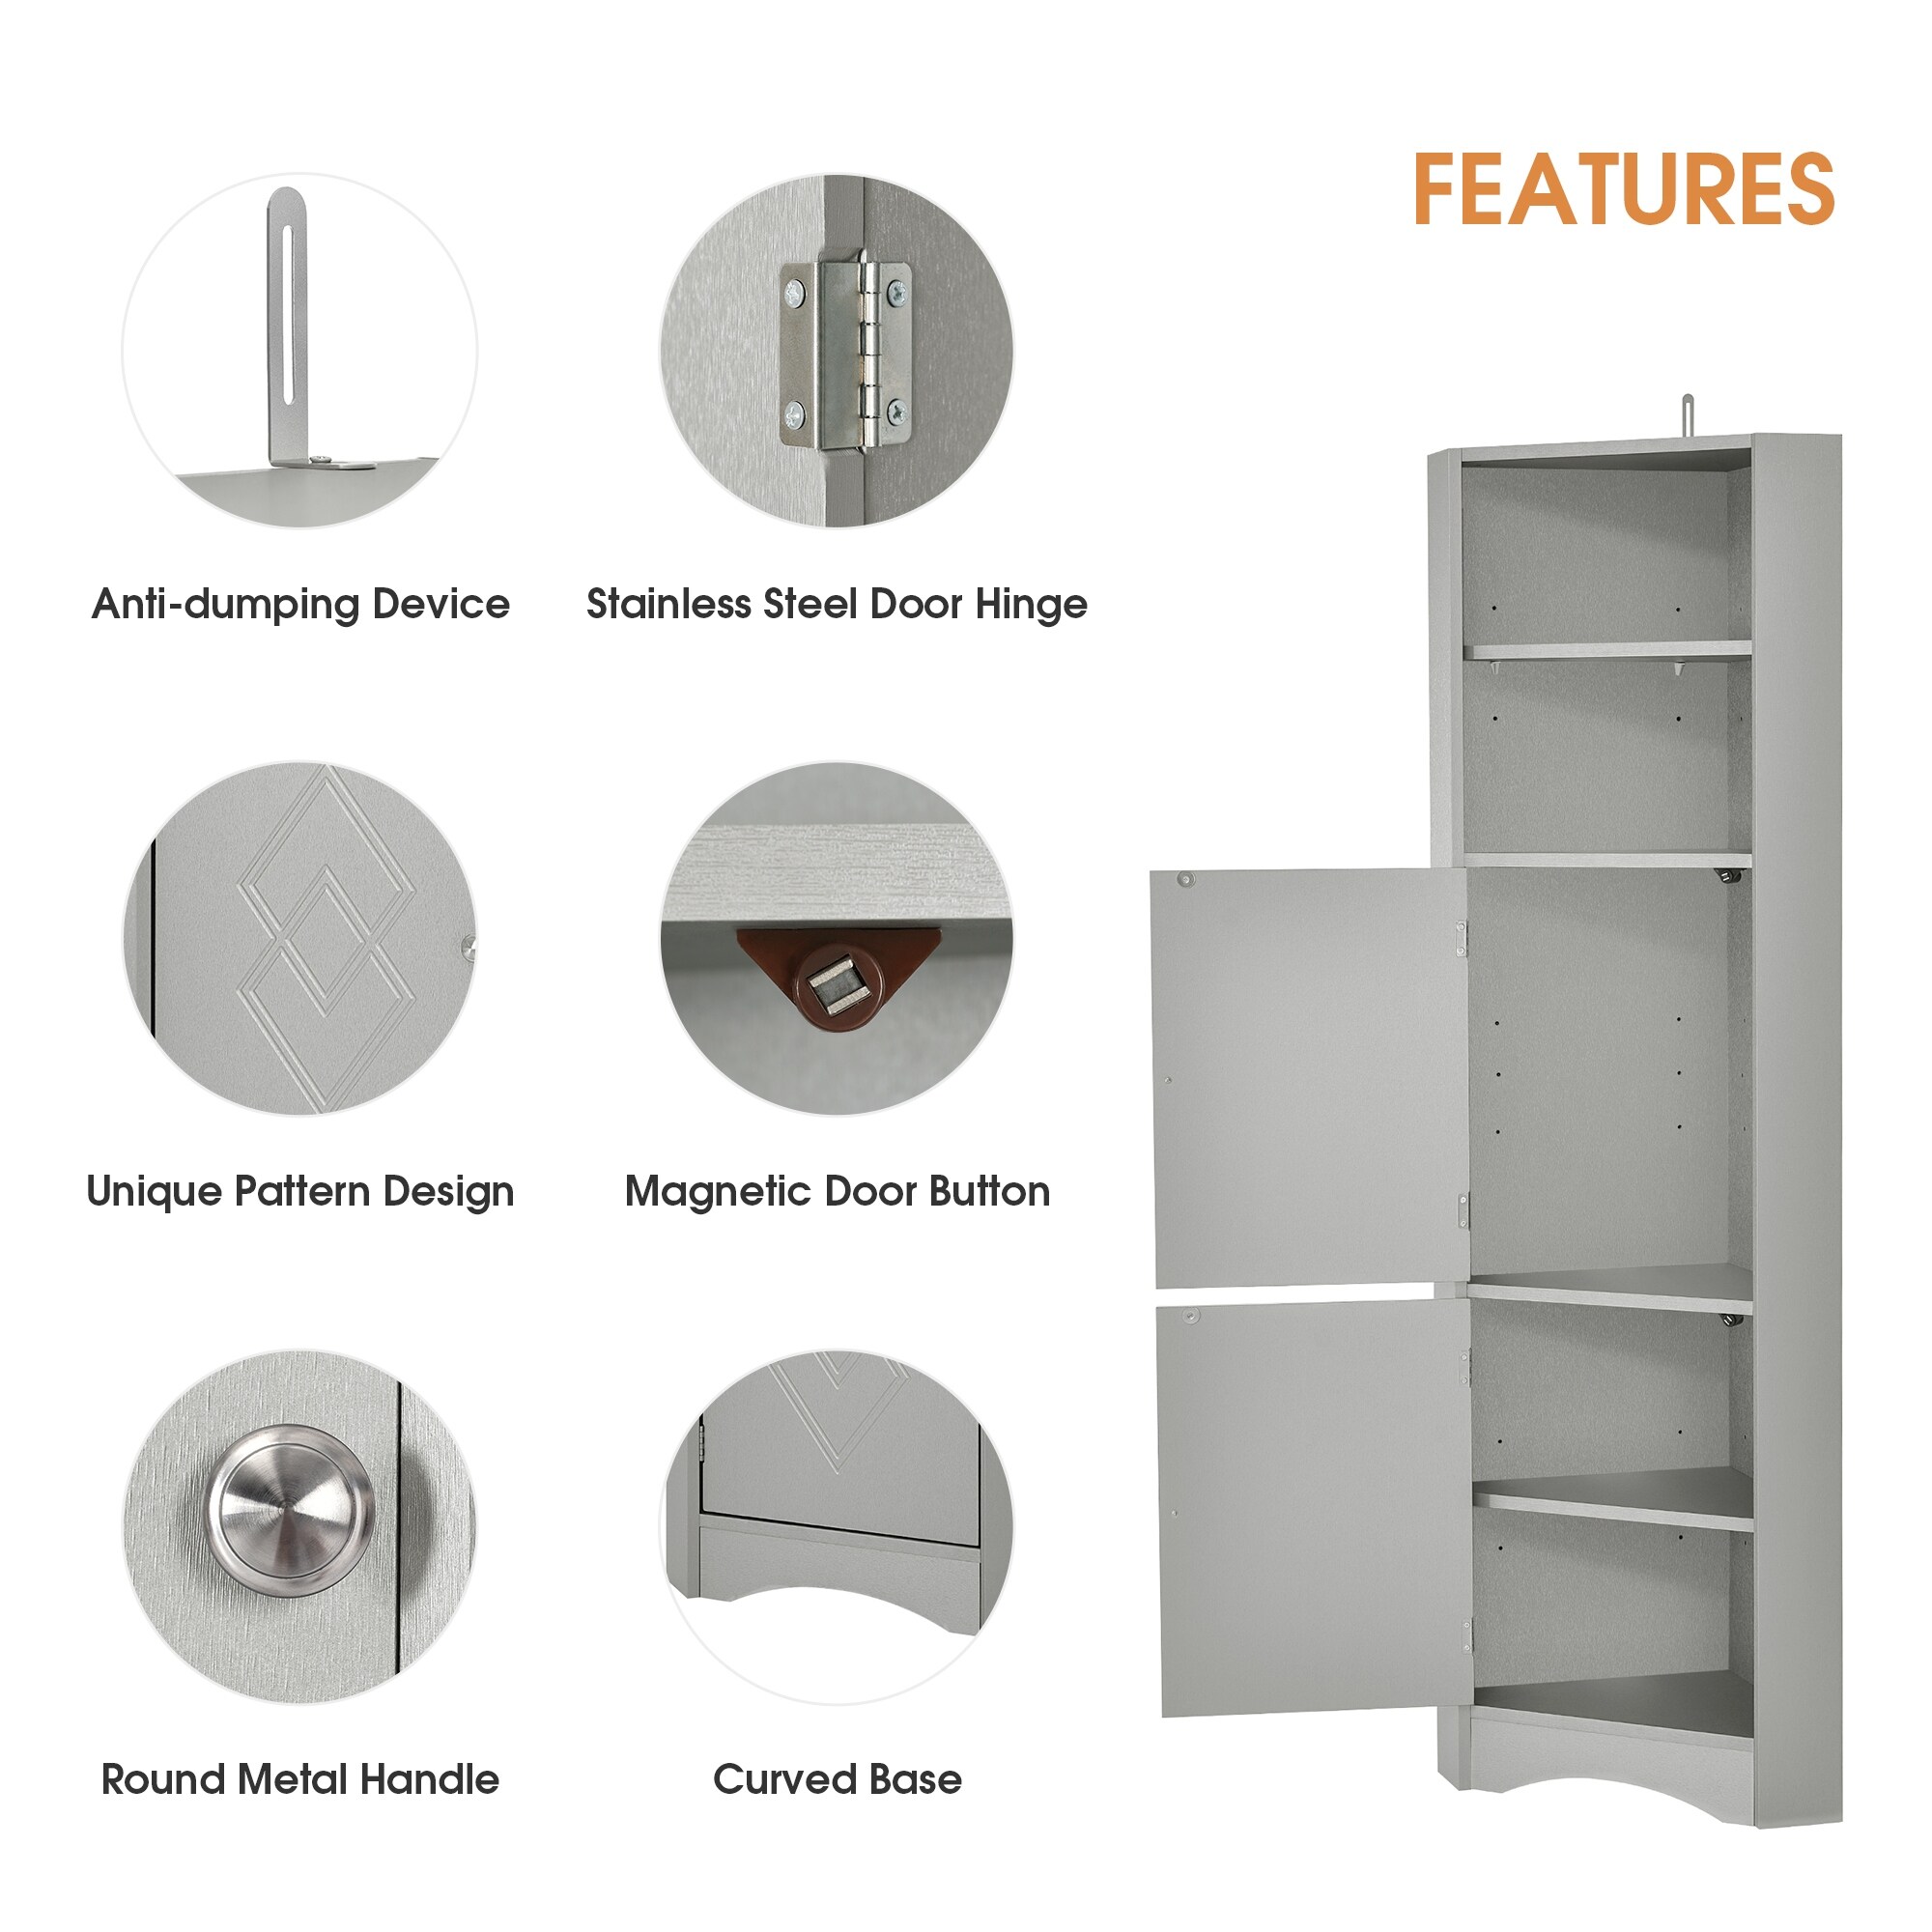 https://ak1.ostkcdn.com/images/products/is/images/direct/06e701a2b03fc3624b7046a24c0e492c72bca9e3/EYIW-Tall-Bathroom-Corner-Cabinet%2C-Freestanding-Storage-Cabinet-with-Doors-and-Adjustable-Shelves%2C-MDF-Board.jpg